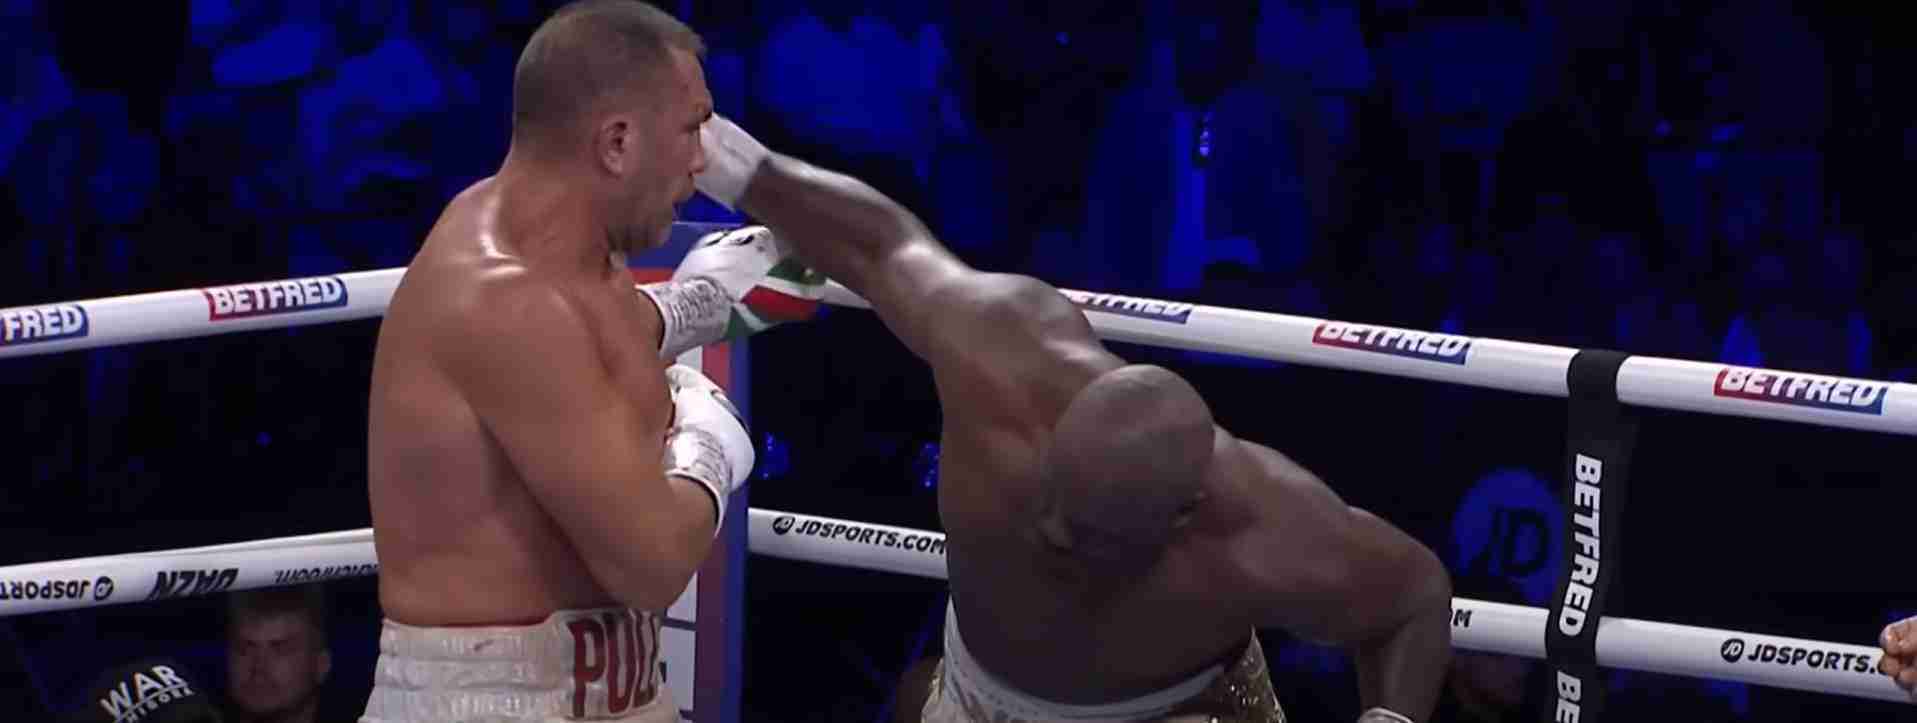 Tremendous 12th Round Of Heavyweight Fight